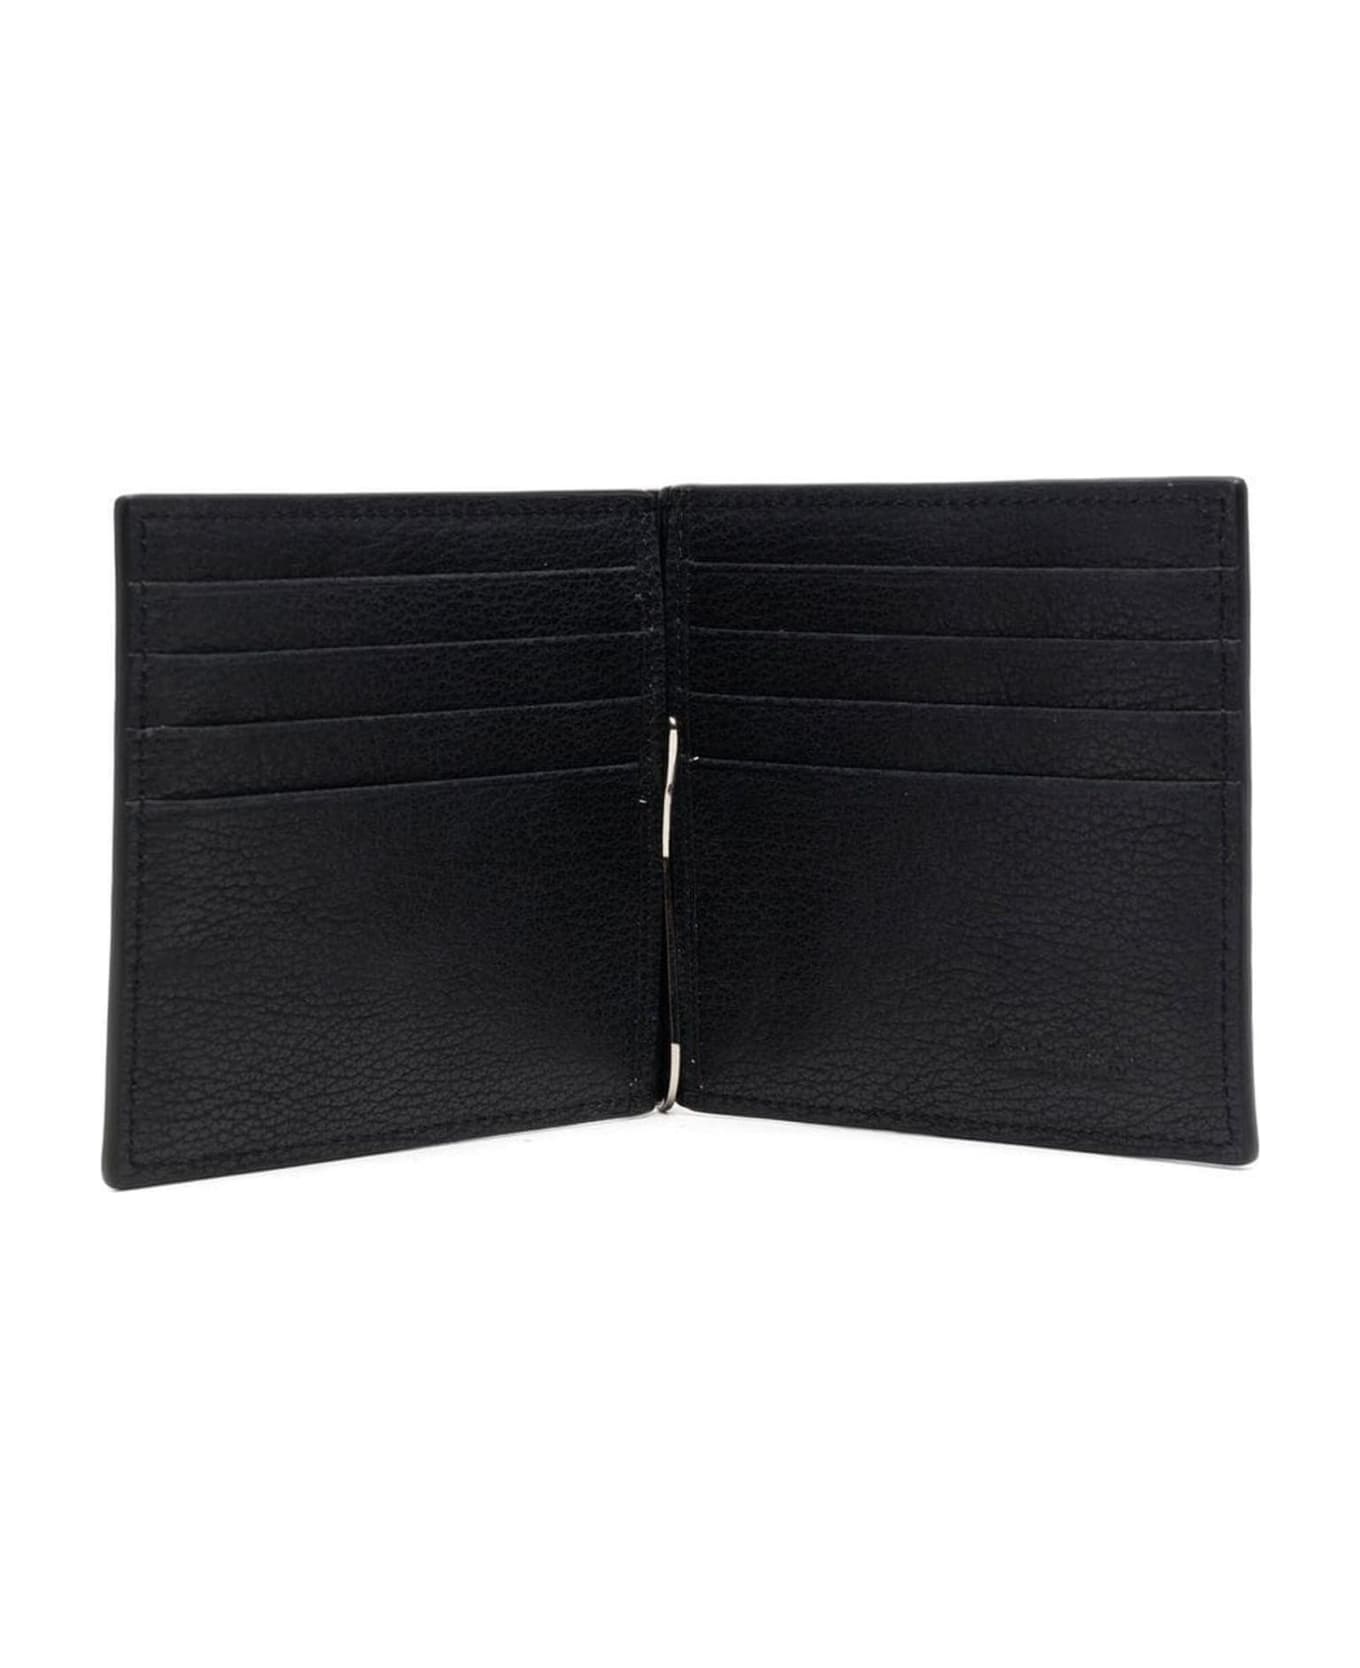 Orciani Black Calf Leather Wallet - Black